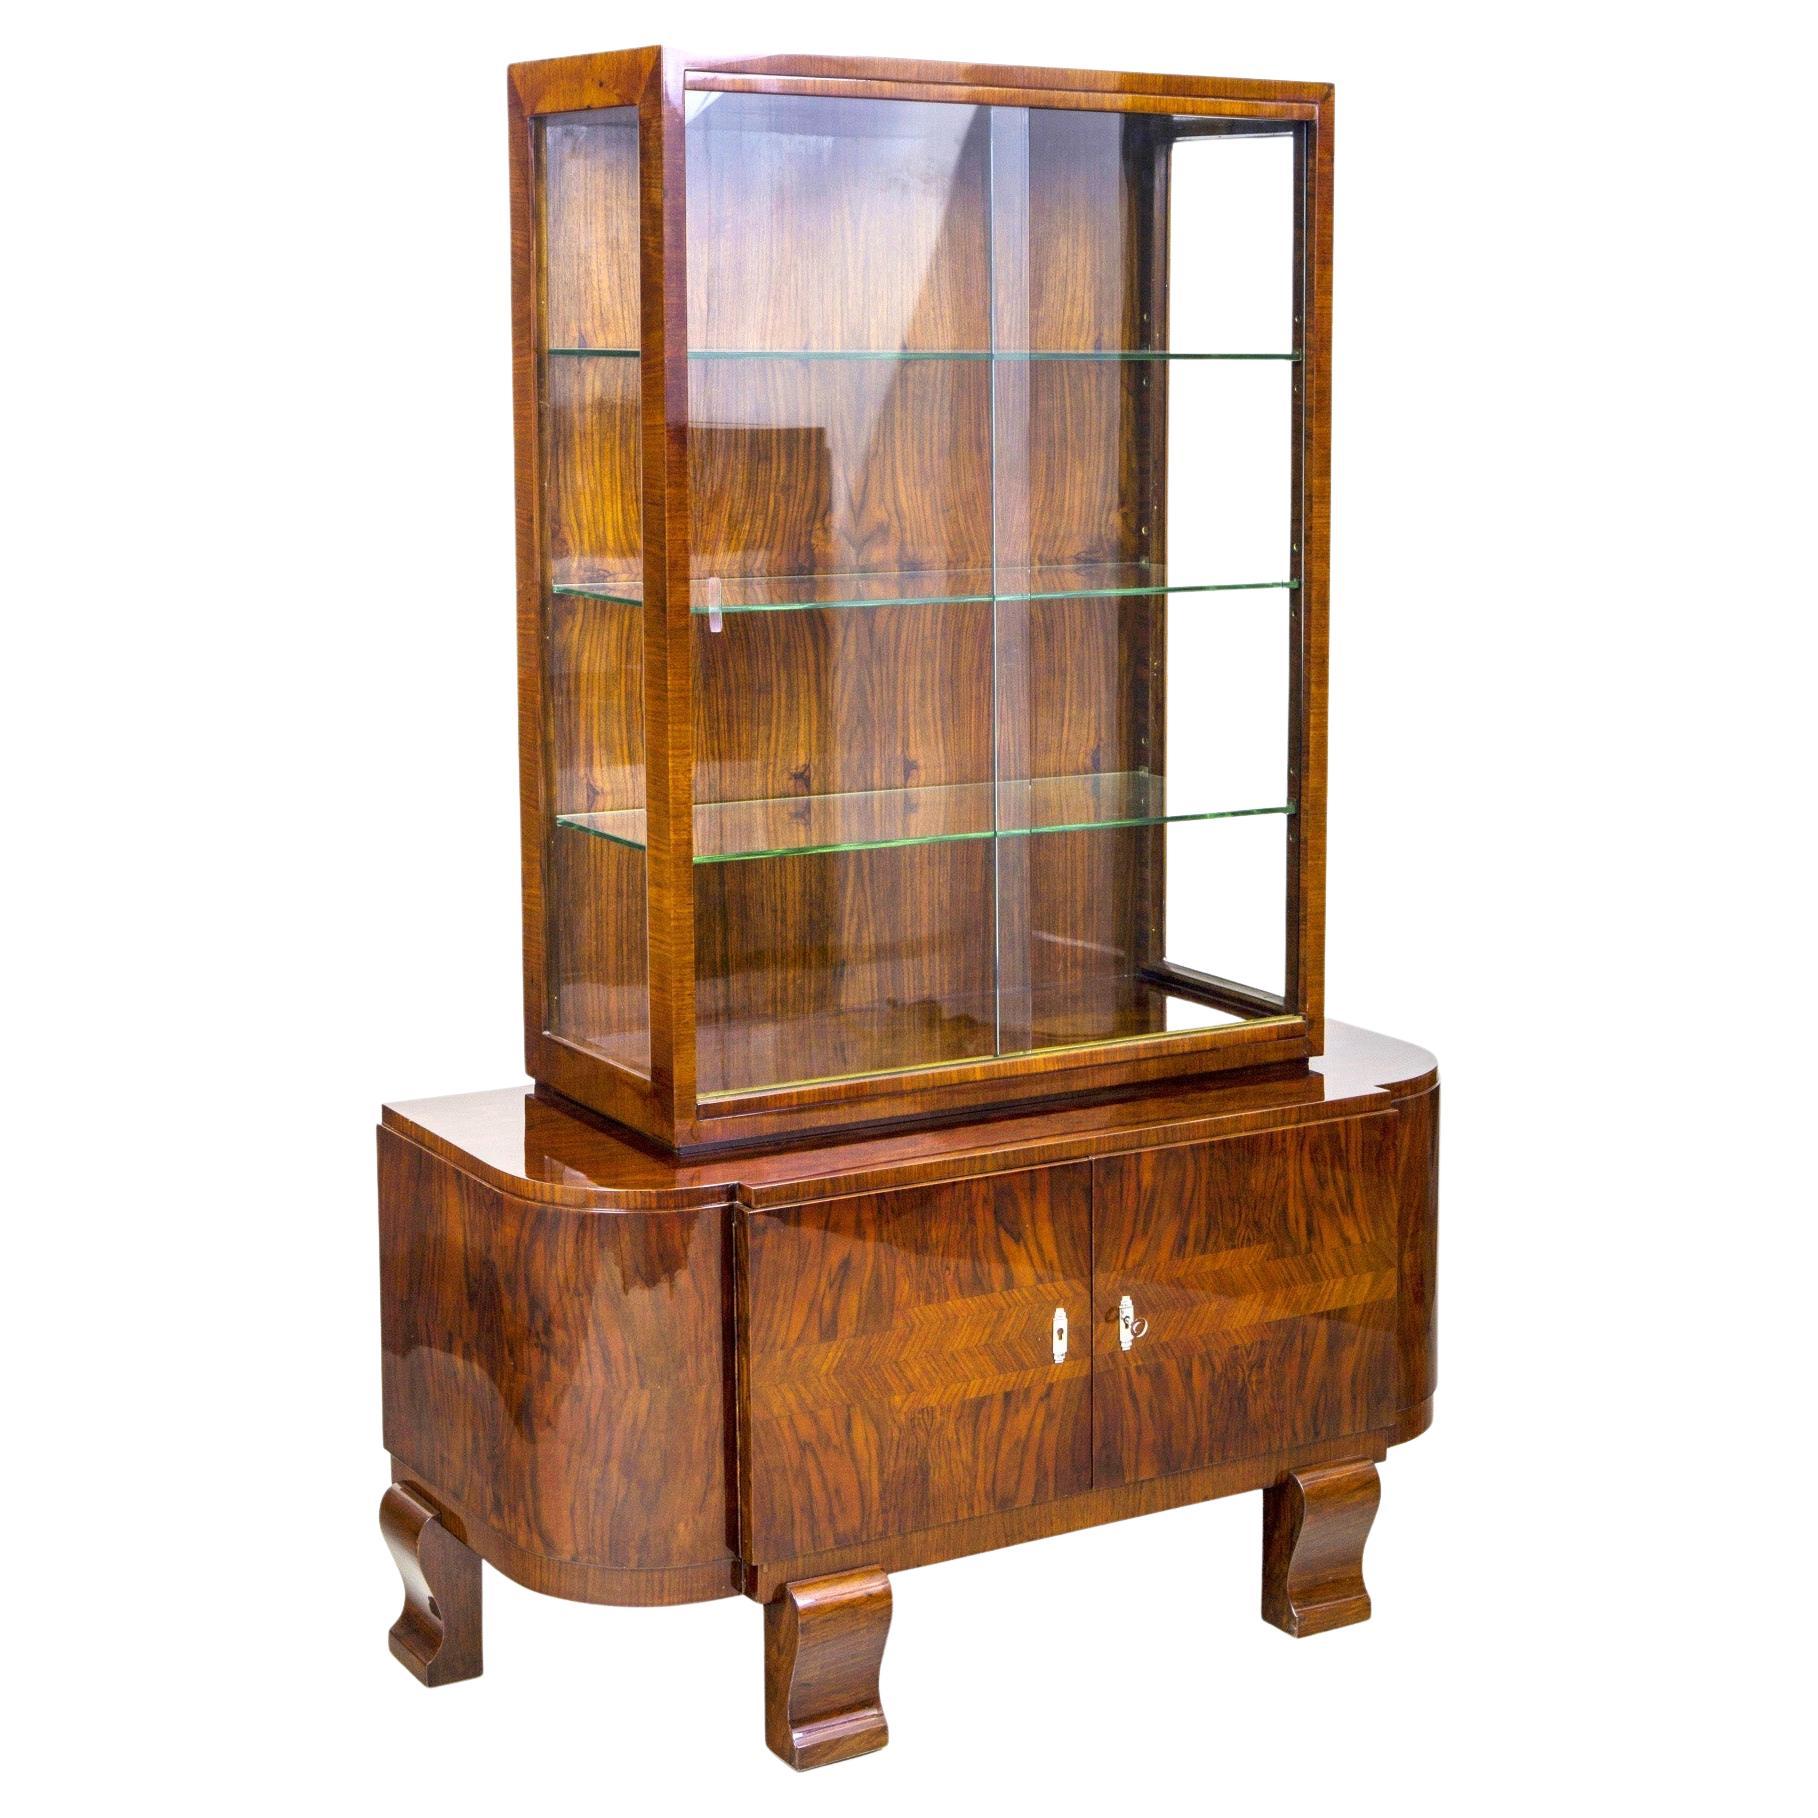 Walnut Display Cabinet Made in France, 1920s, Art Deco Style, Restored